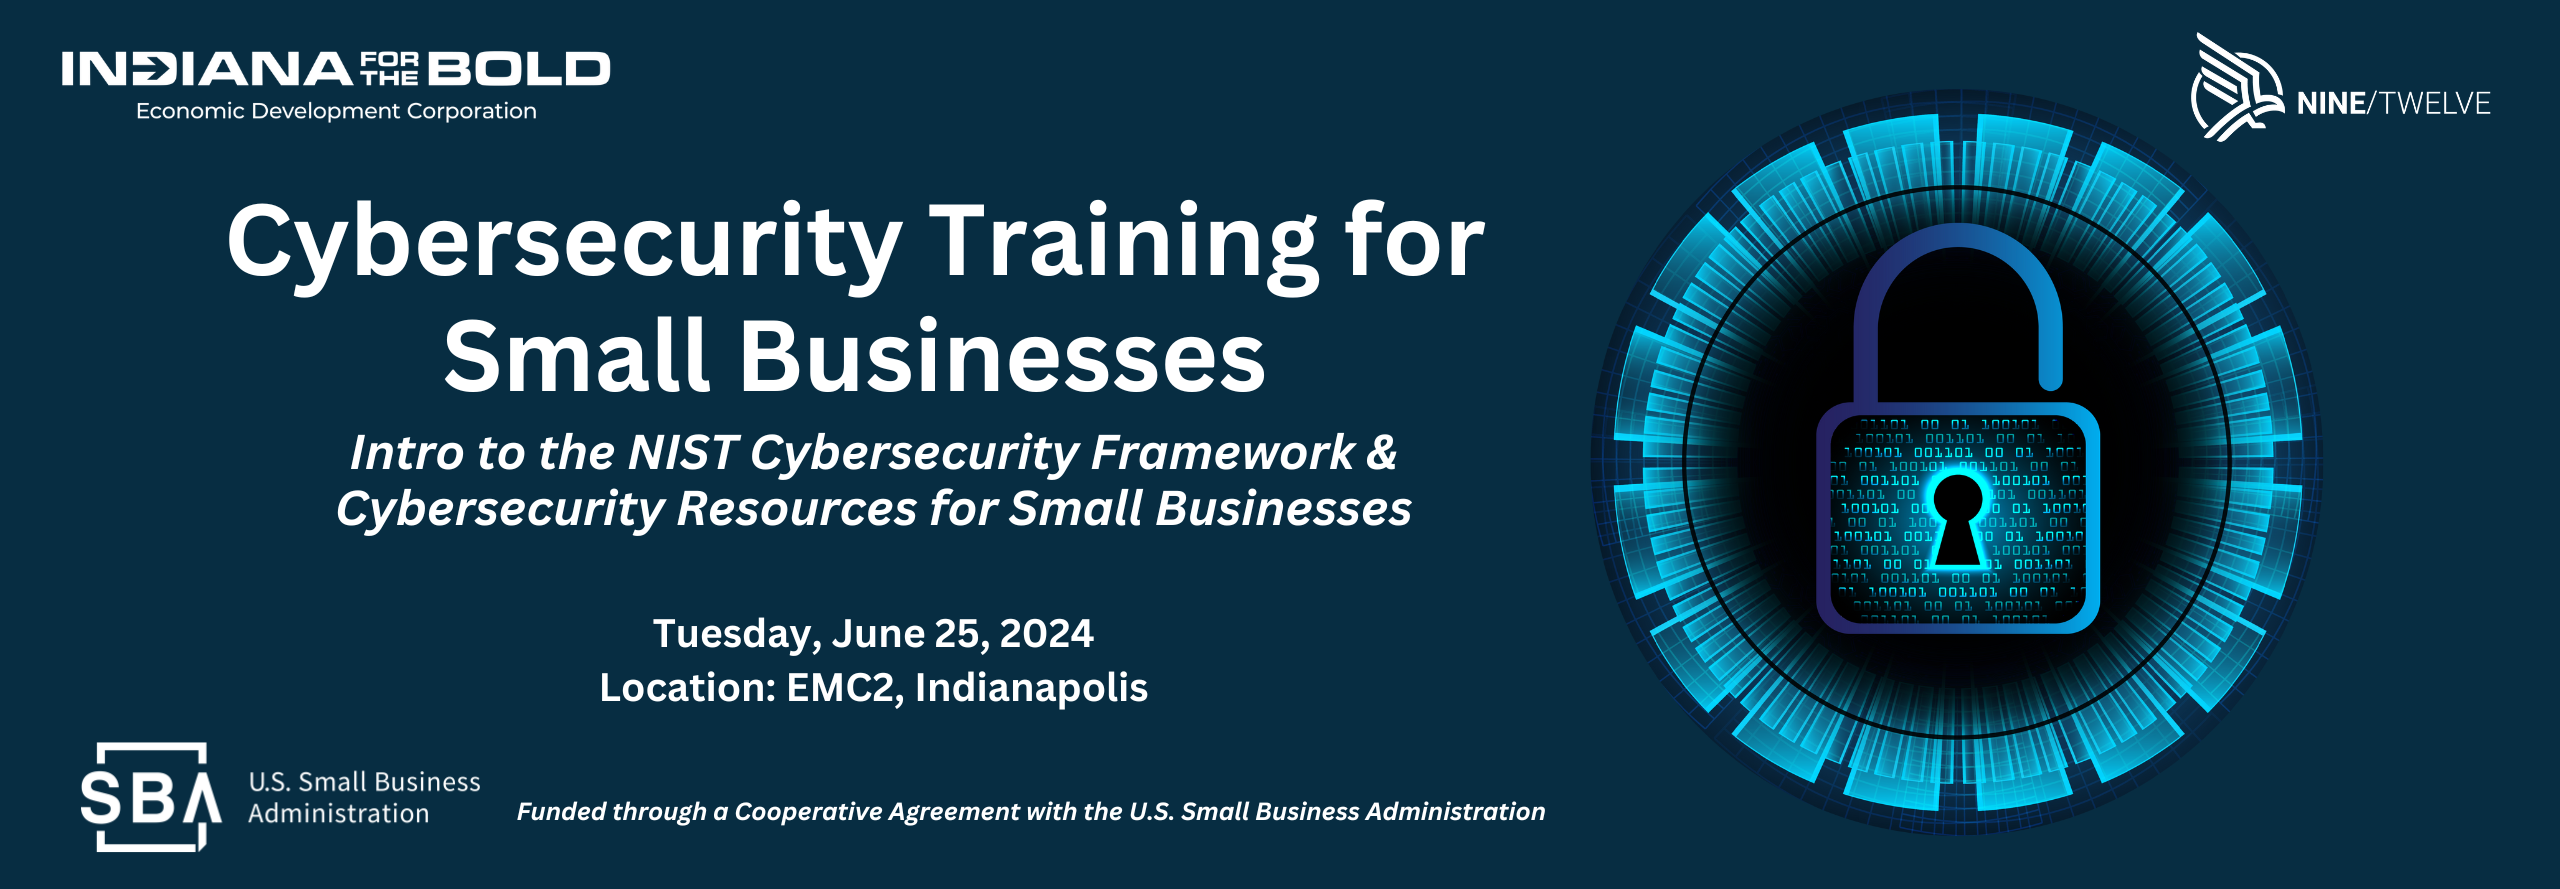 Cybersecurity Training for Small Businesses: Intro to the NIST CSF 2.0 & Cybersecurity Resources